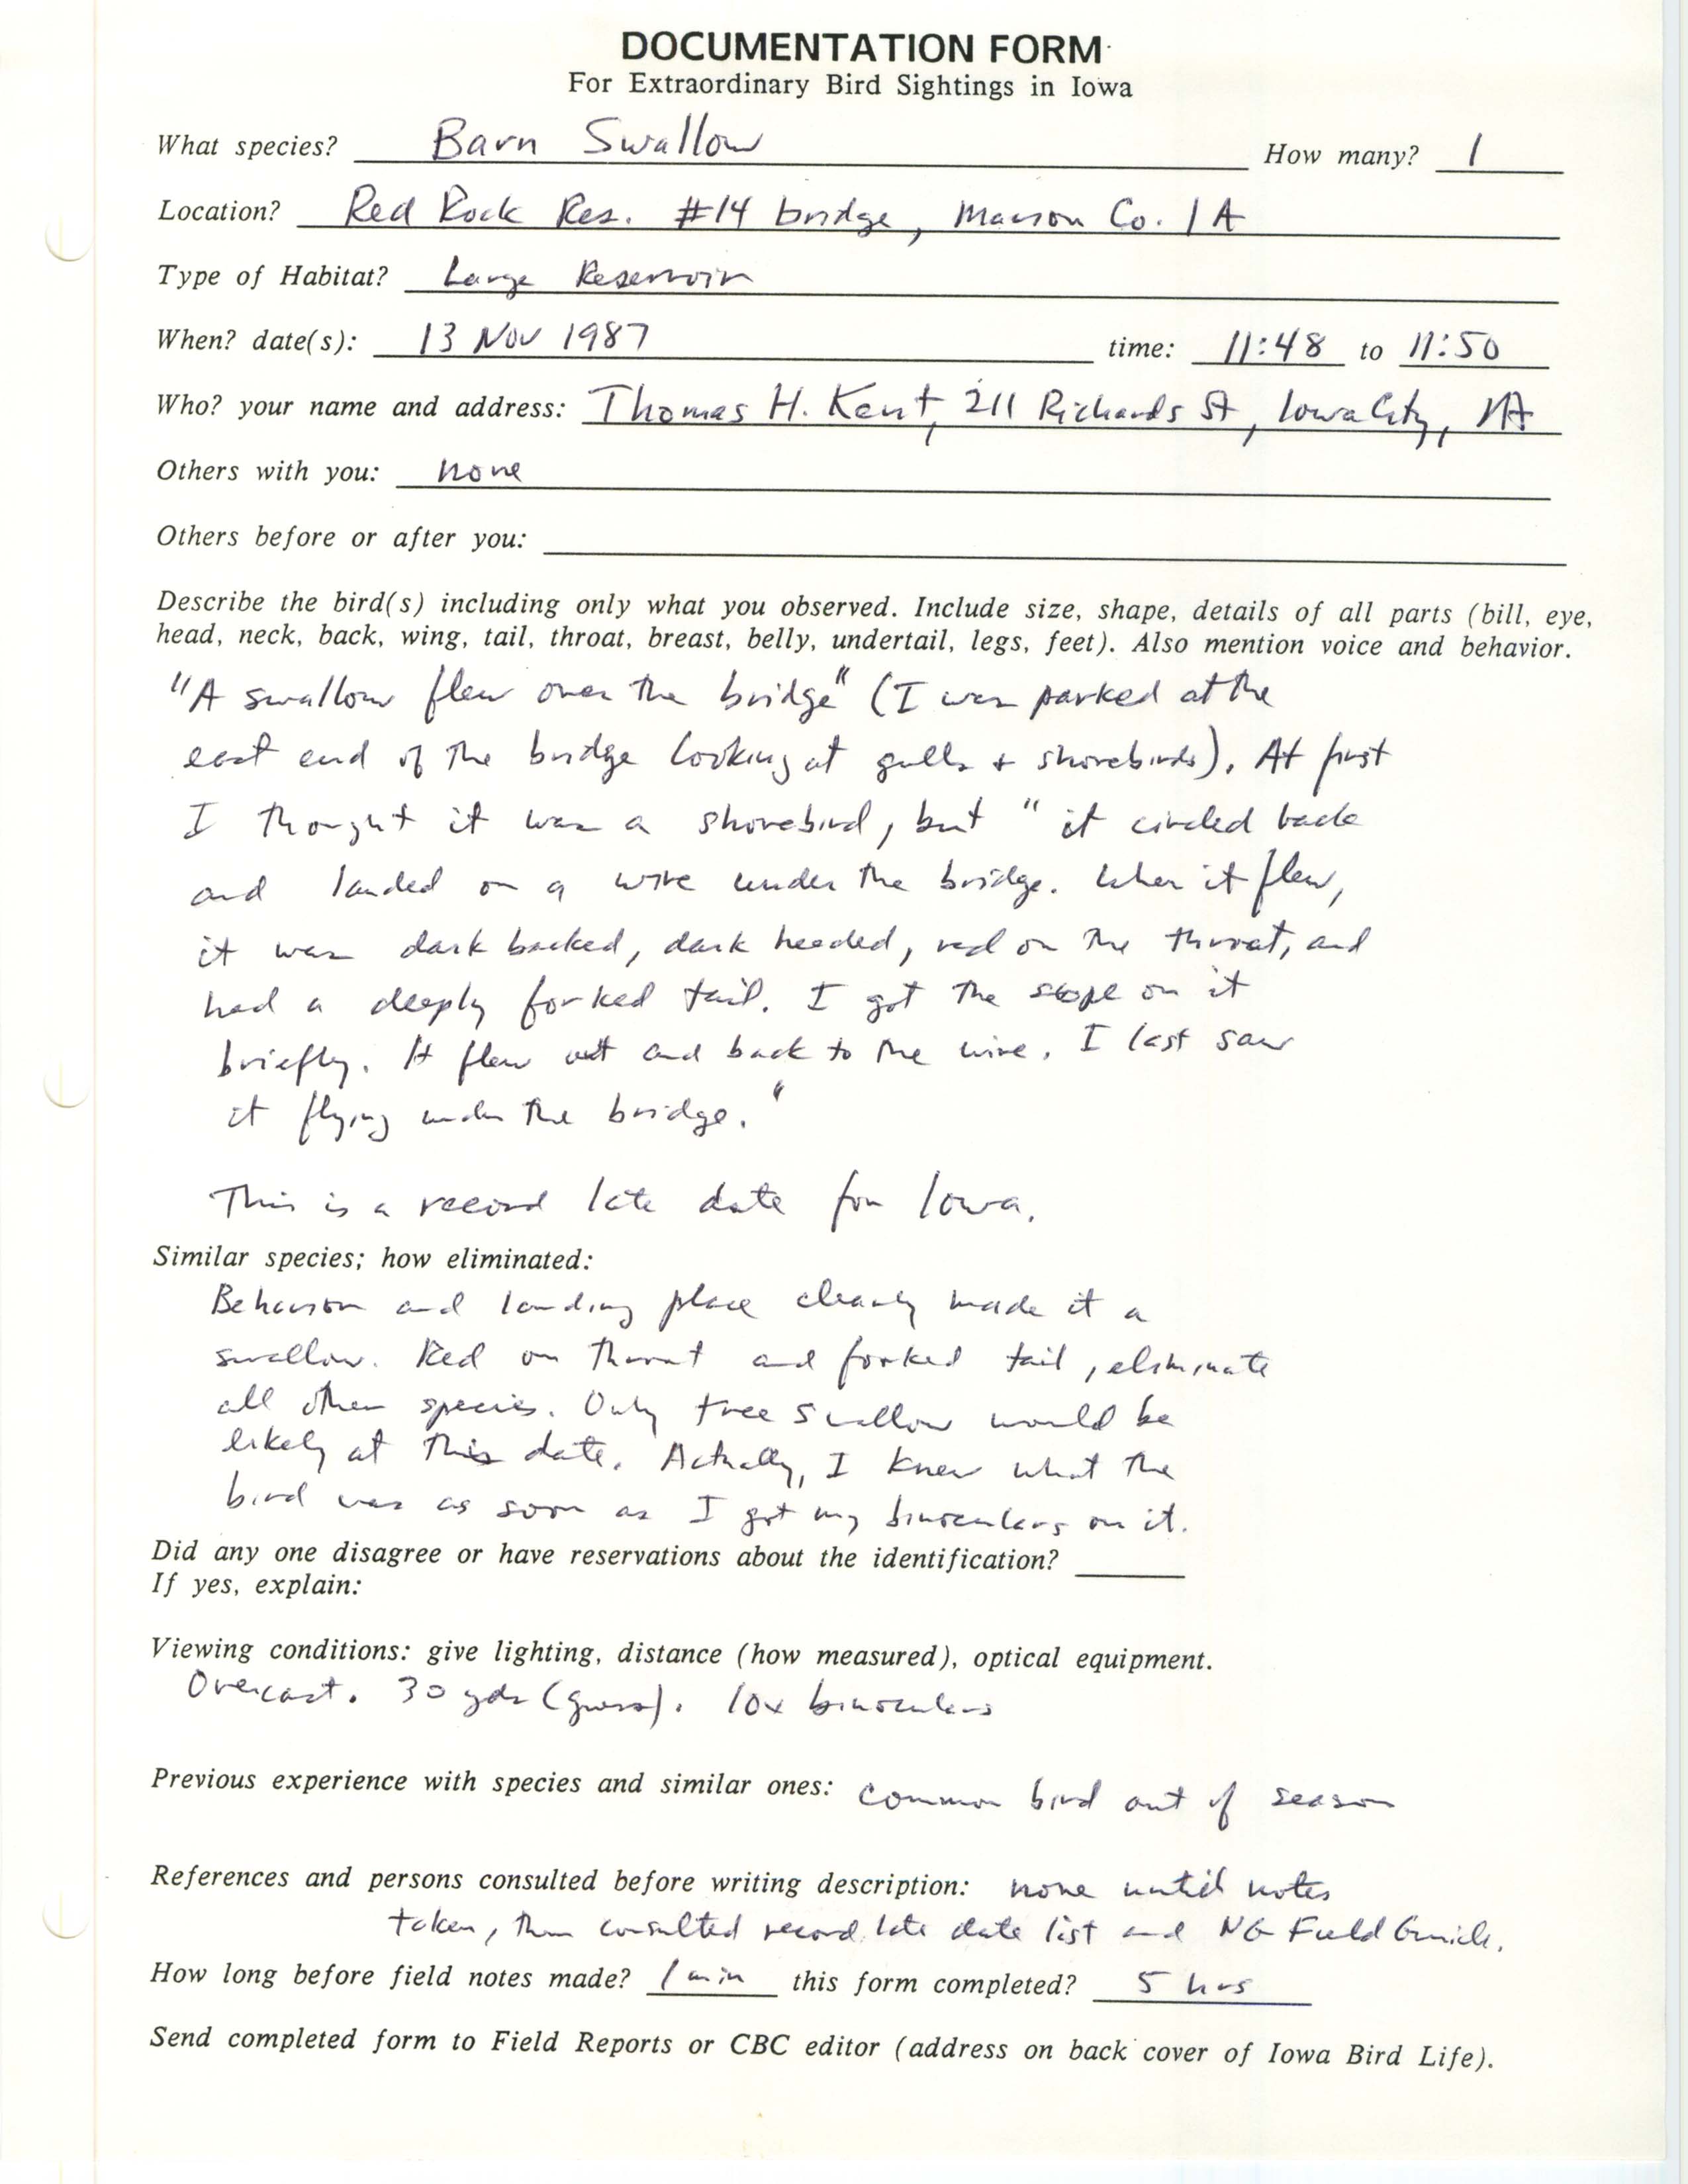 Rare bird documentation form for Barn Swallow at Red Rock Reservoir, 1987